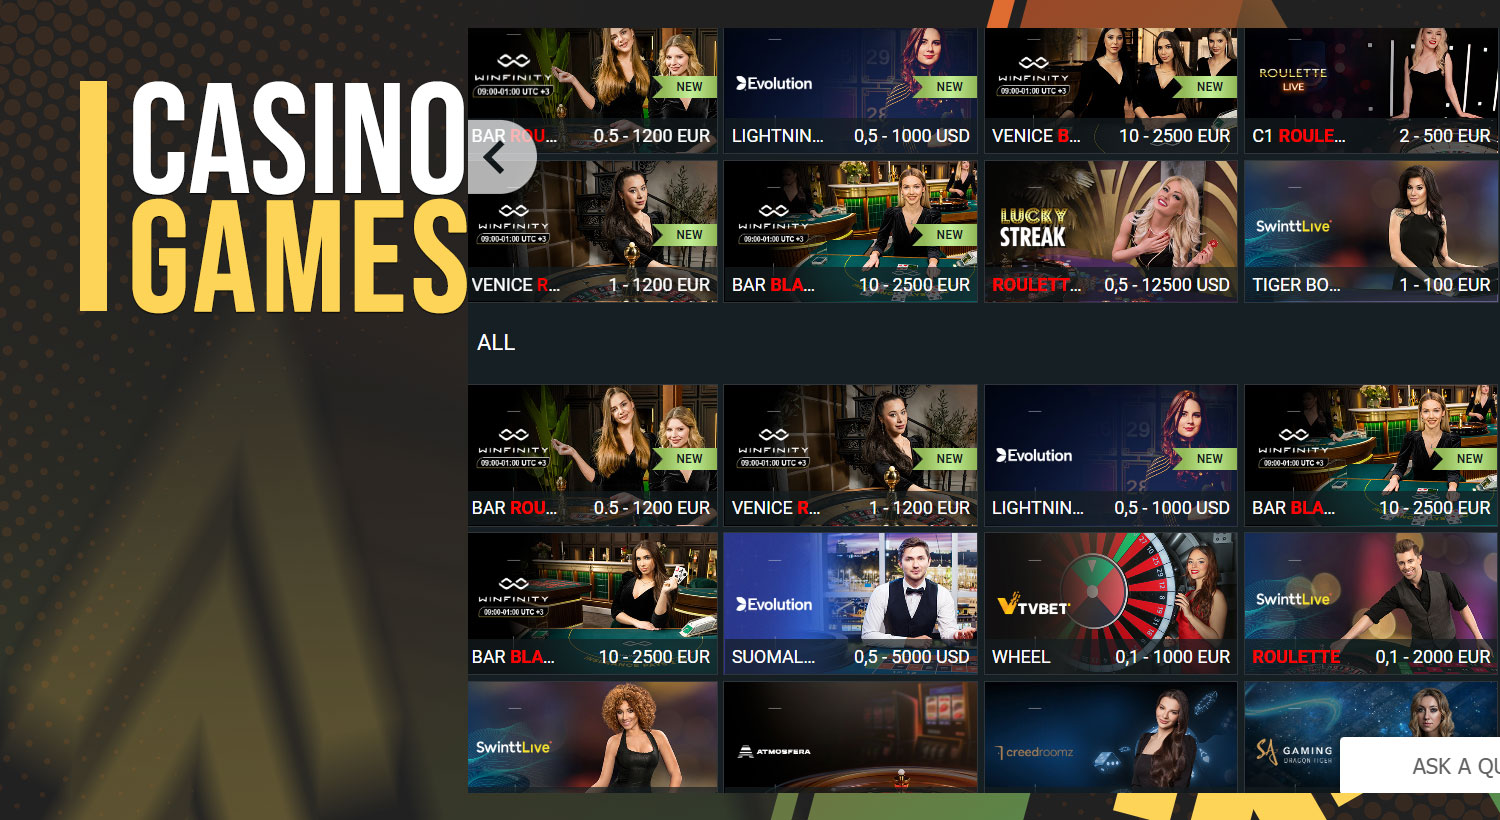 all available casino games on the melbet platform.